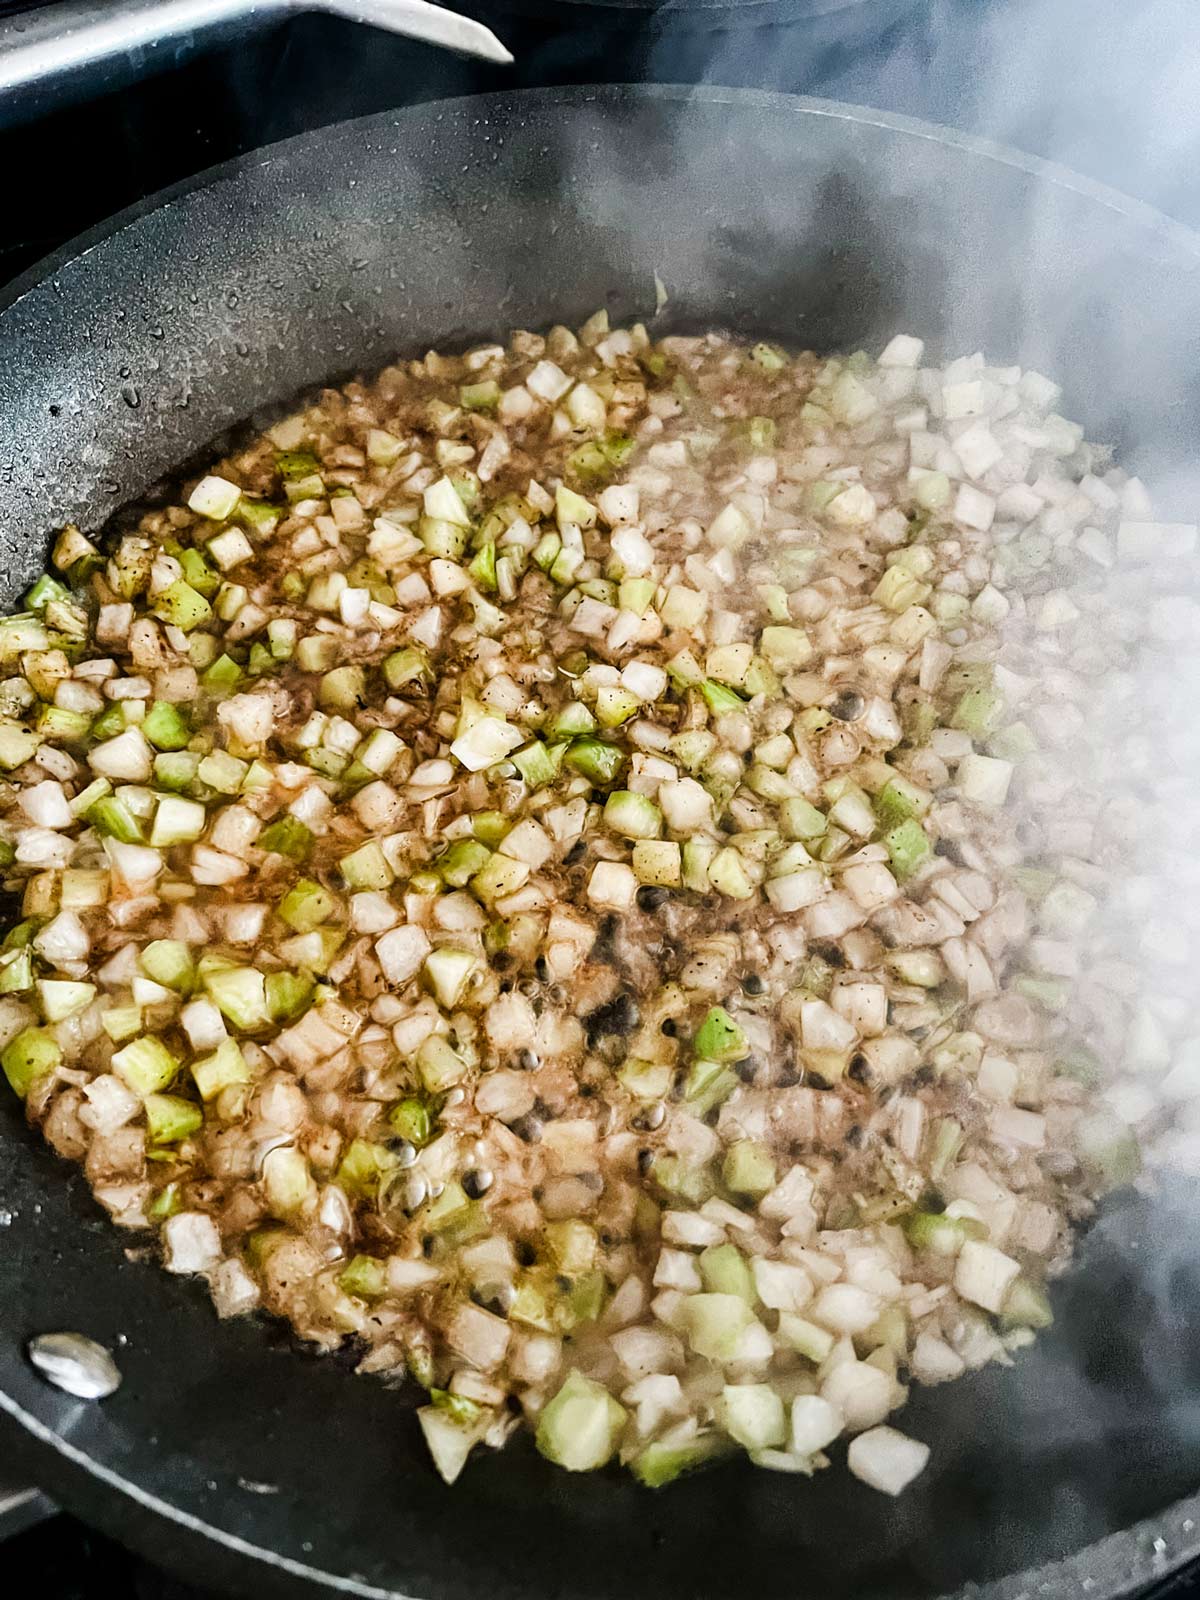 Onion and celery cooking in a skillet.